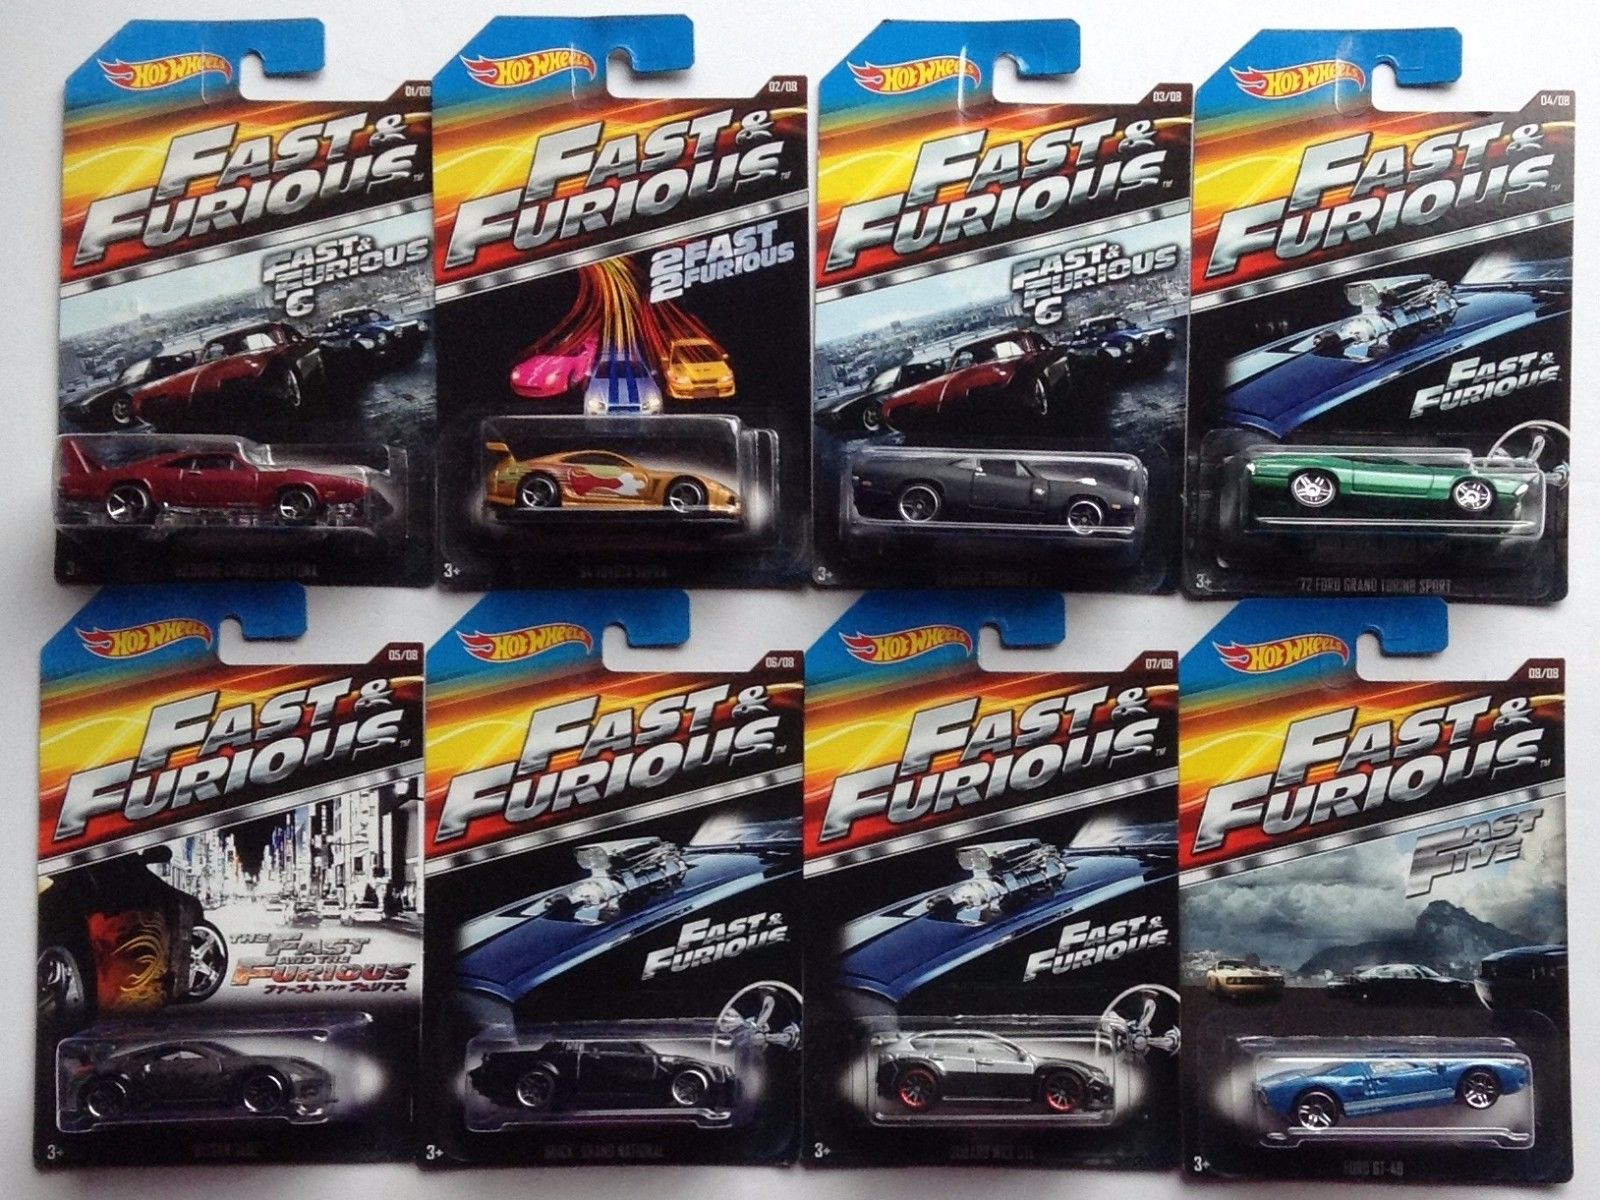 2015 Hot Wheels Fast & Furious Complete Set of 8 Walmart Exclusive. 